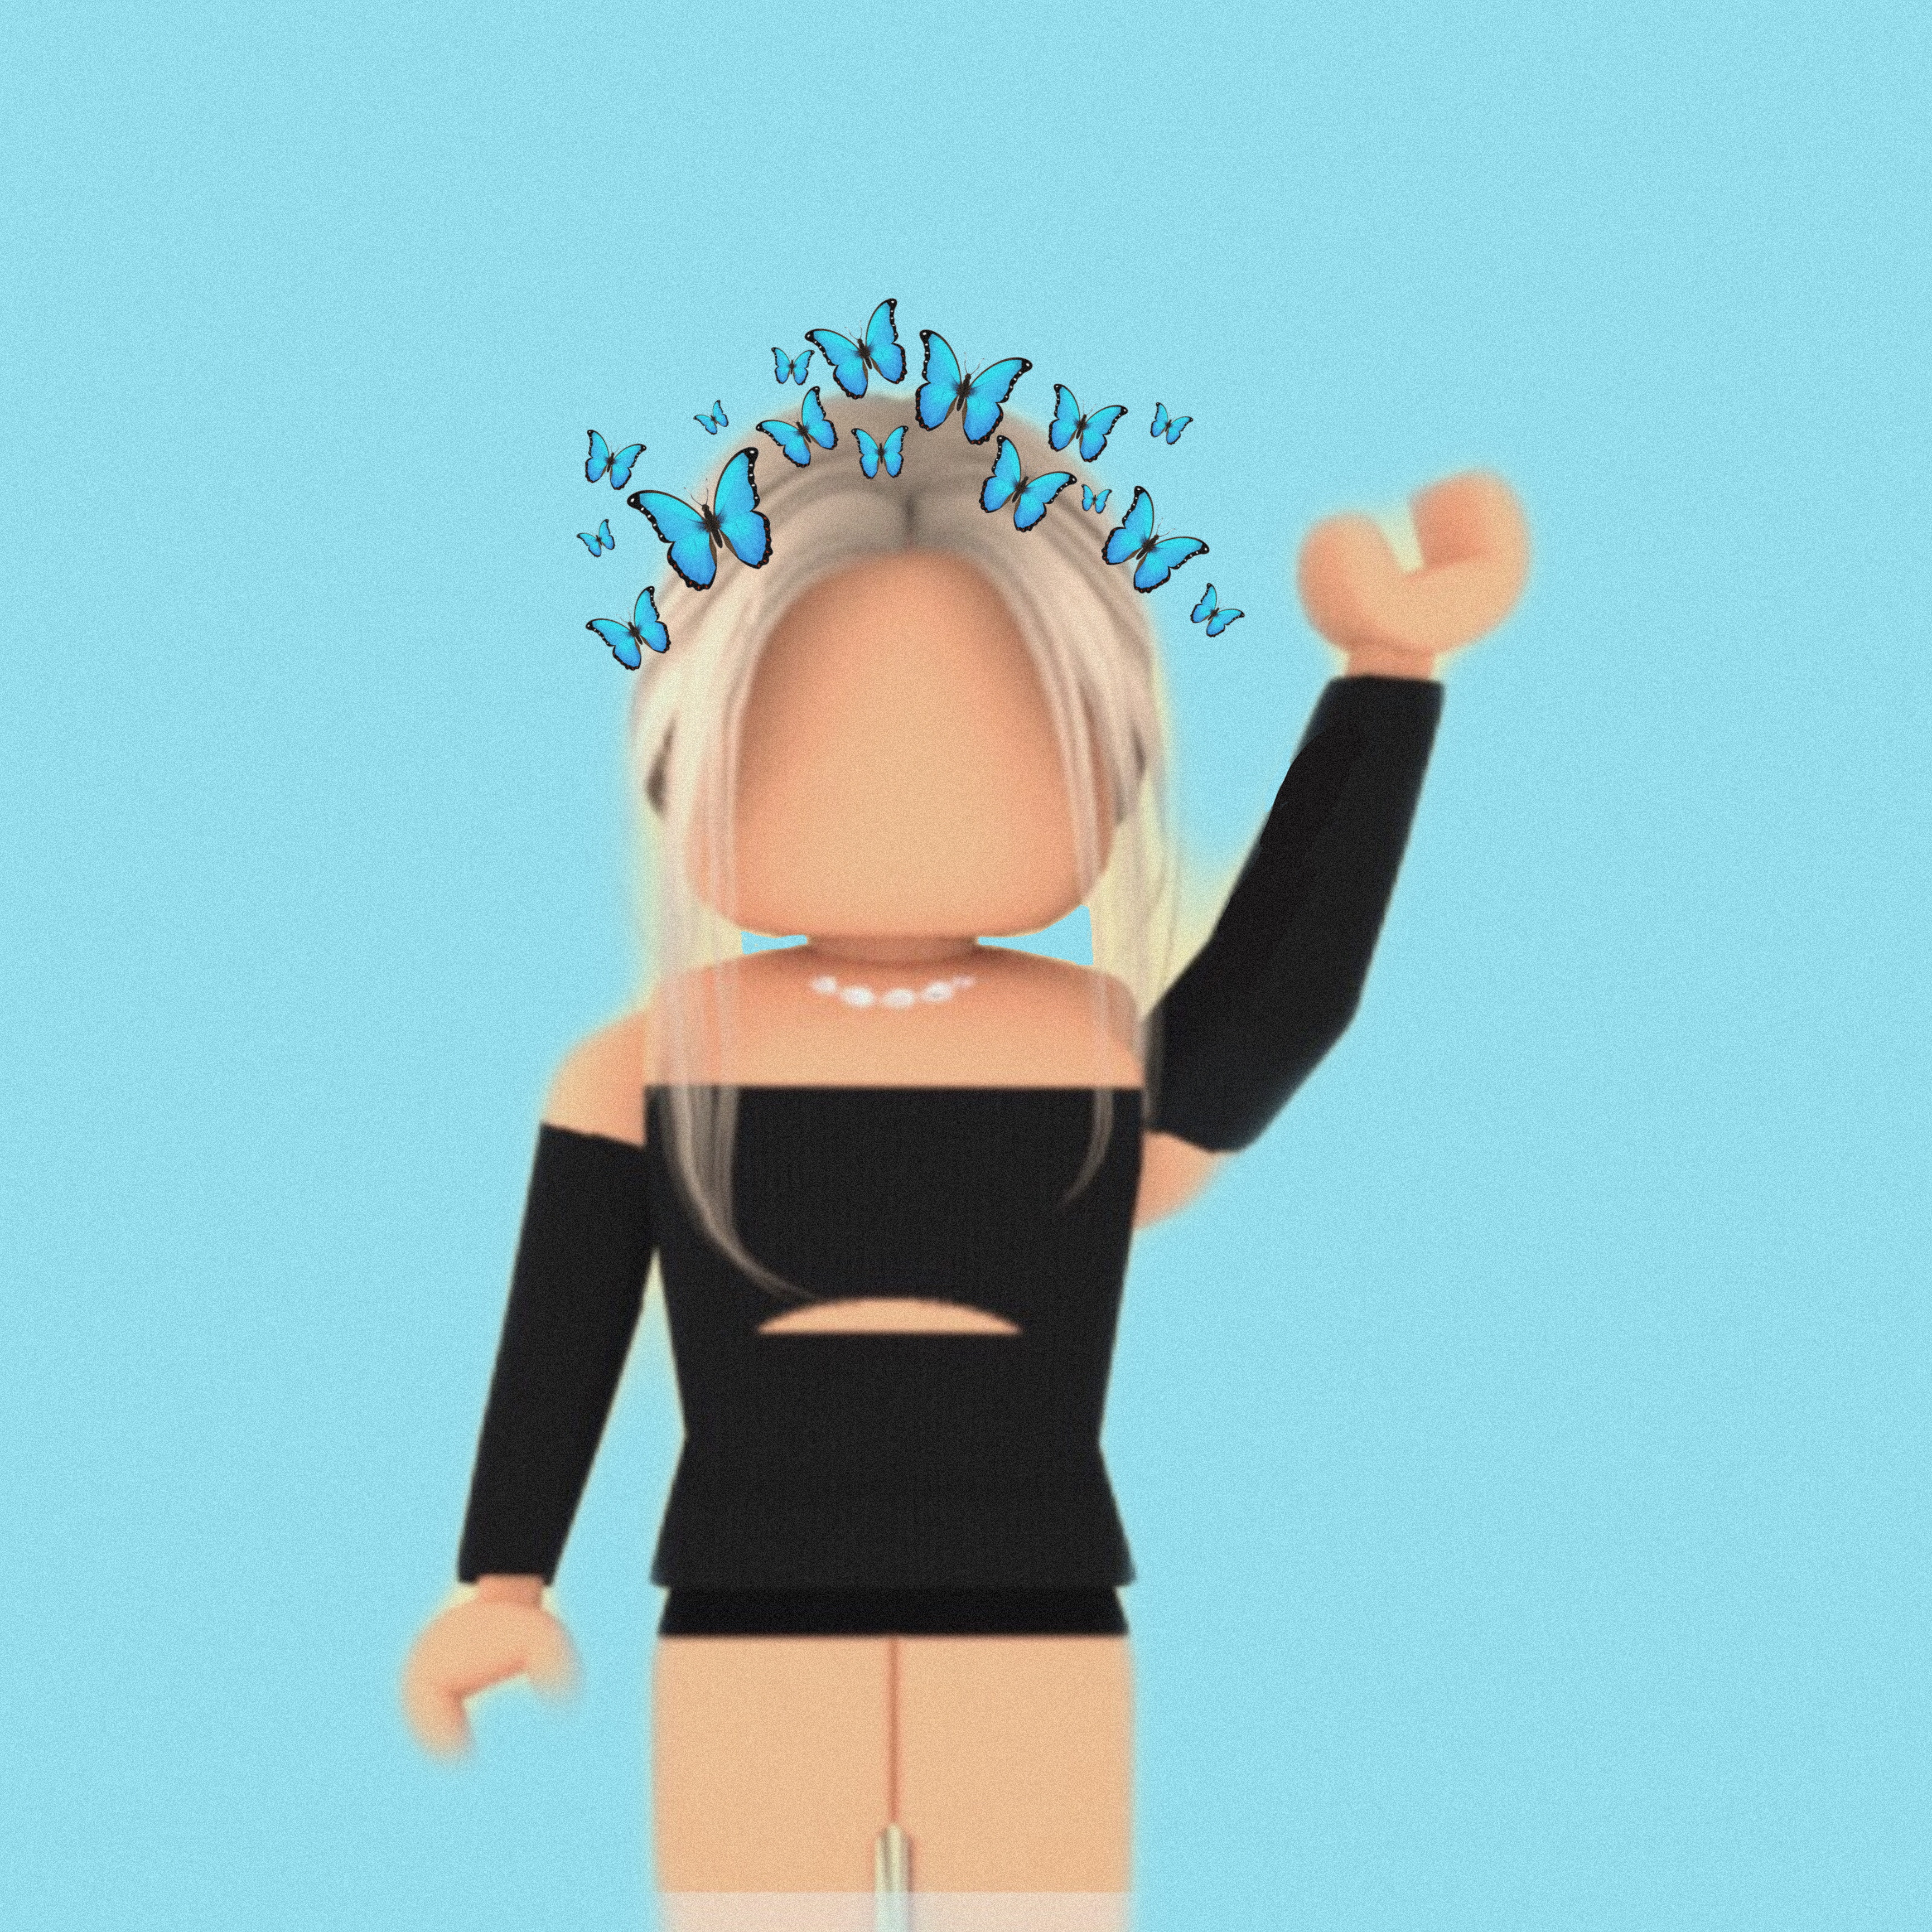 Roblox Girl Butterflies Image By Emmie - aesthetic roblox girl butterfly